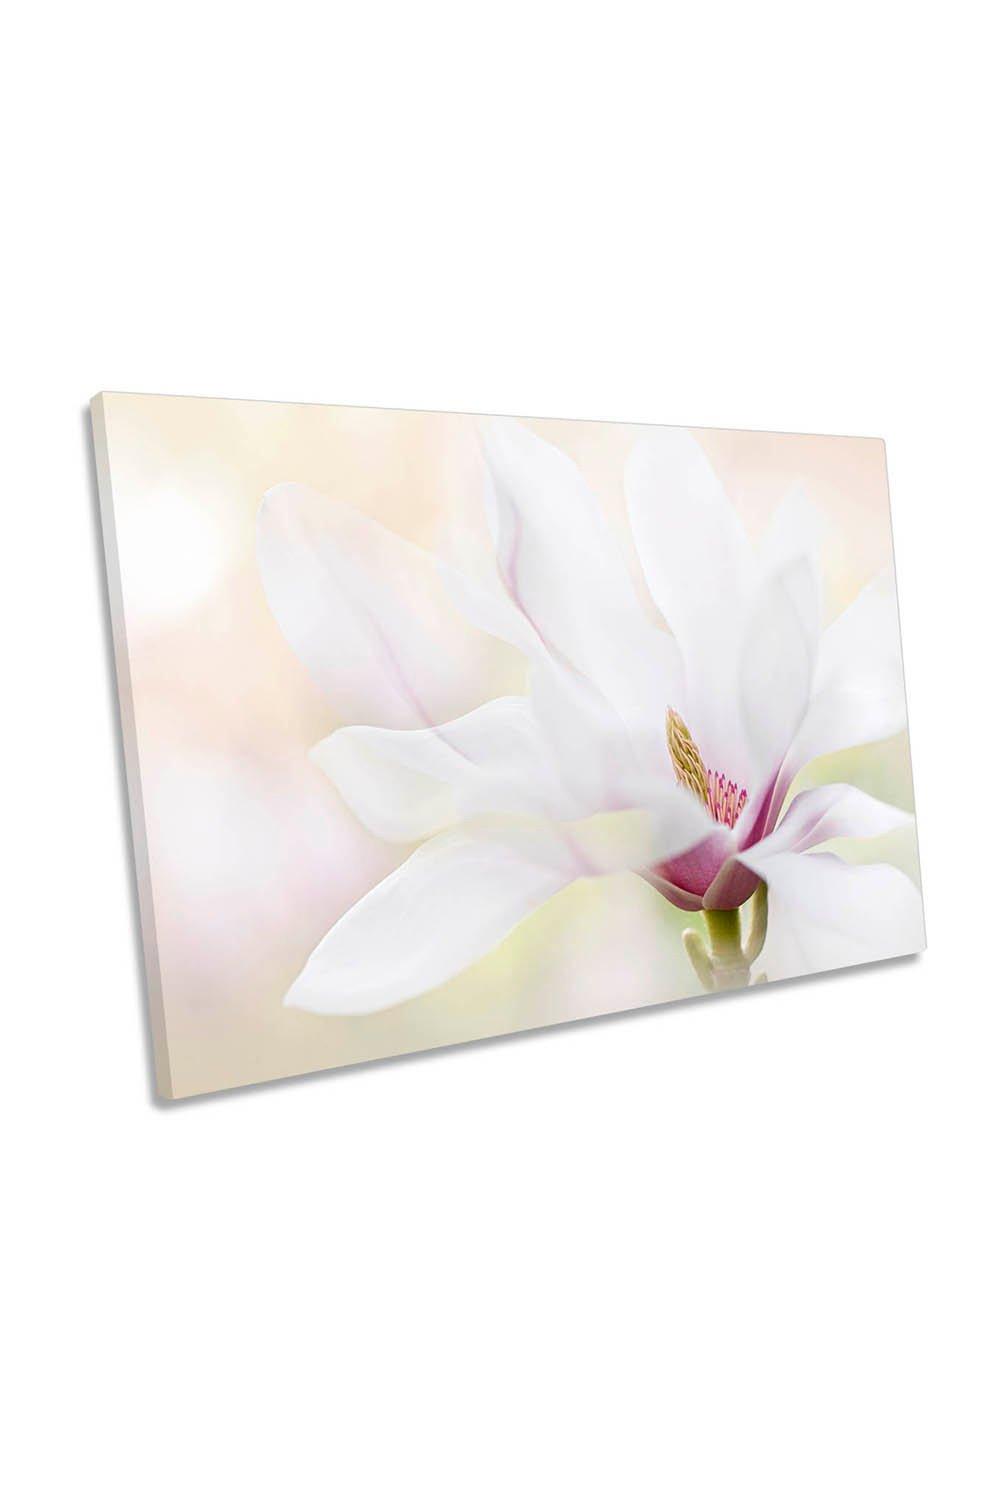 Purity White Floral Magnolia Flower Canvas Wall Art Picture Print